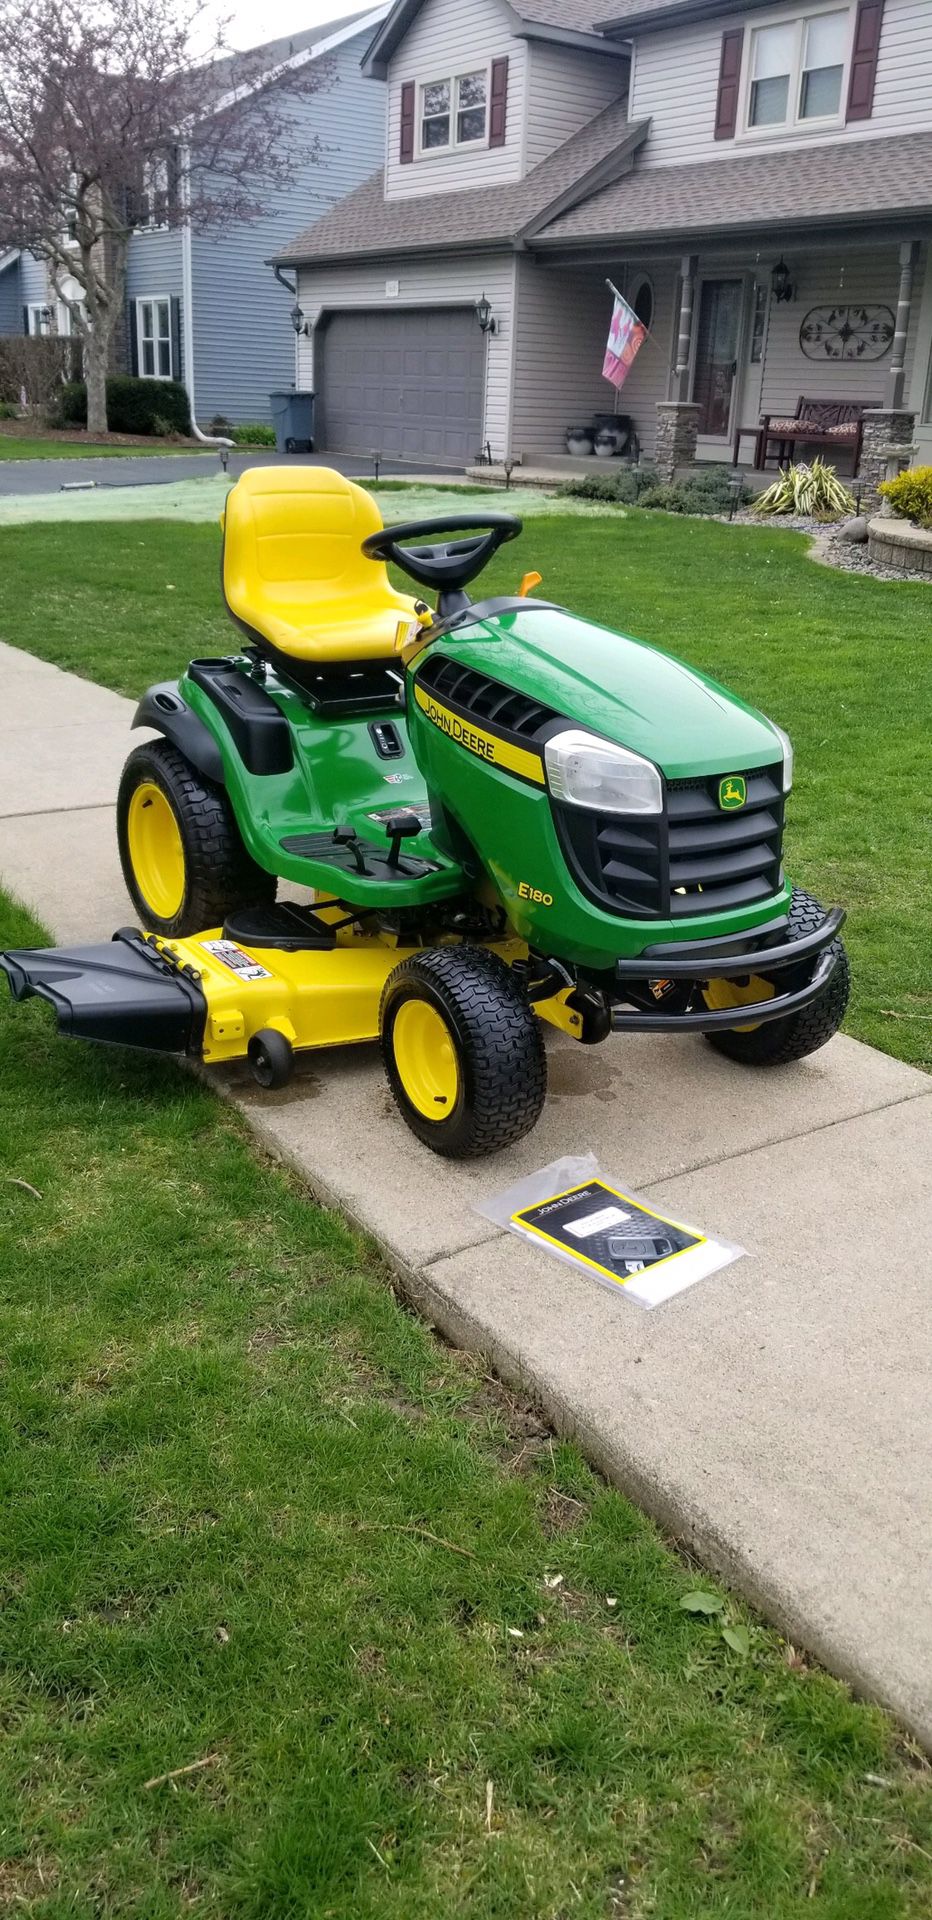 John Deere E180 25-HP V-twin Side By Side Hydrostatic 54-in Riding Lawn Mower with Mulching Capability (Kit Sold Separately)  Model # BG21072